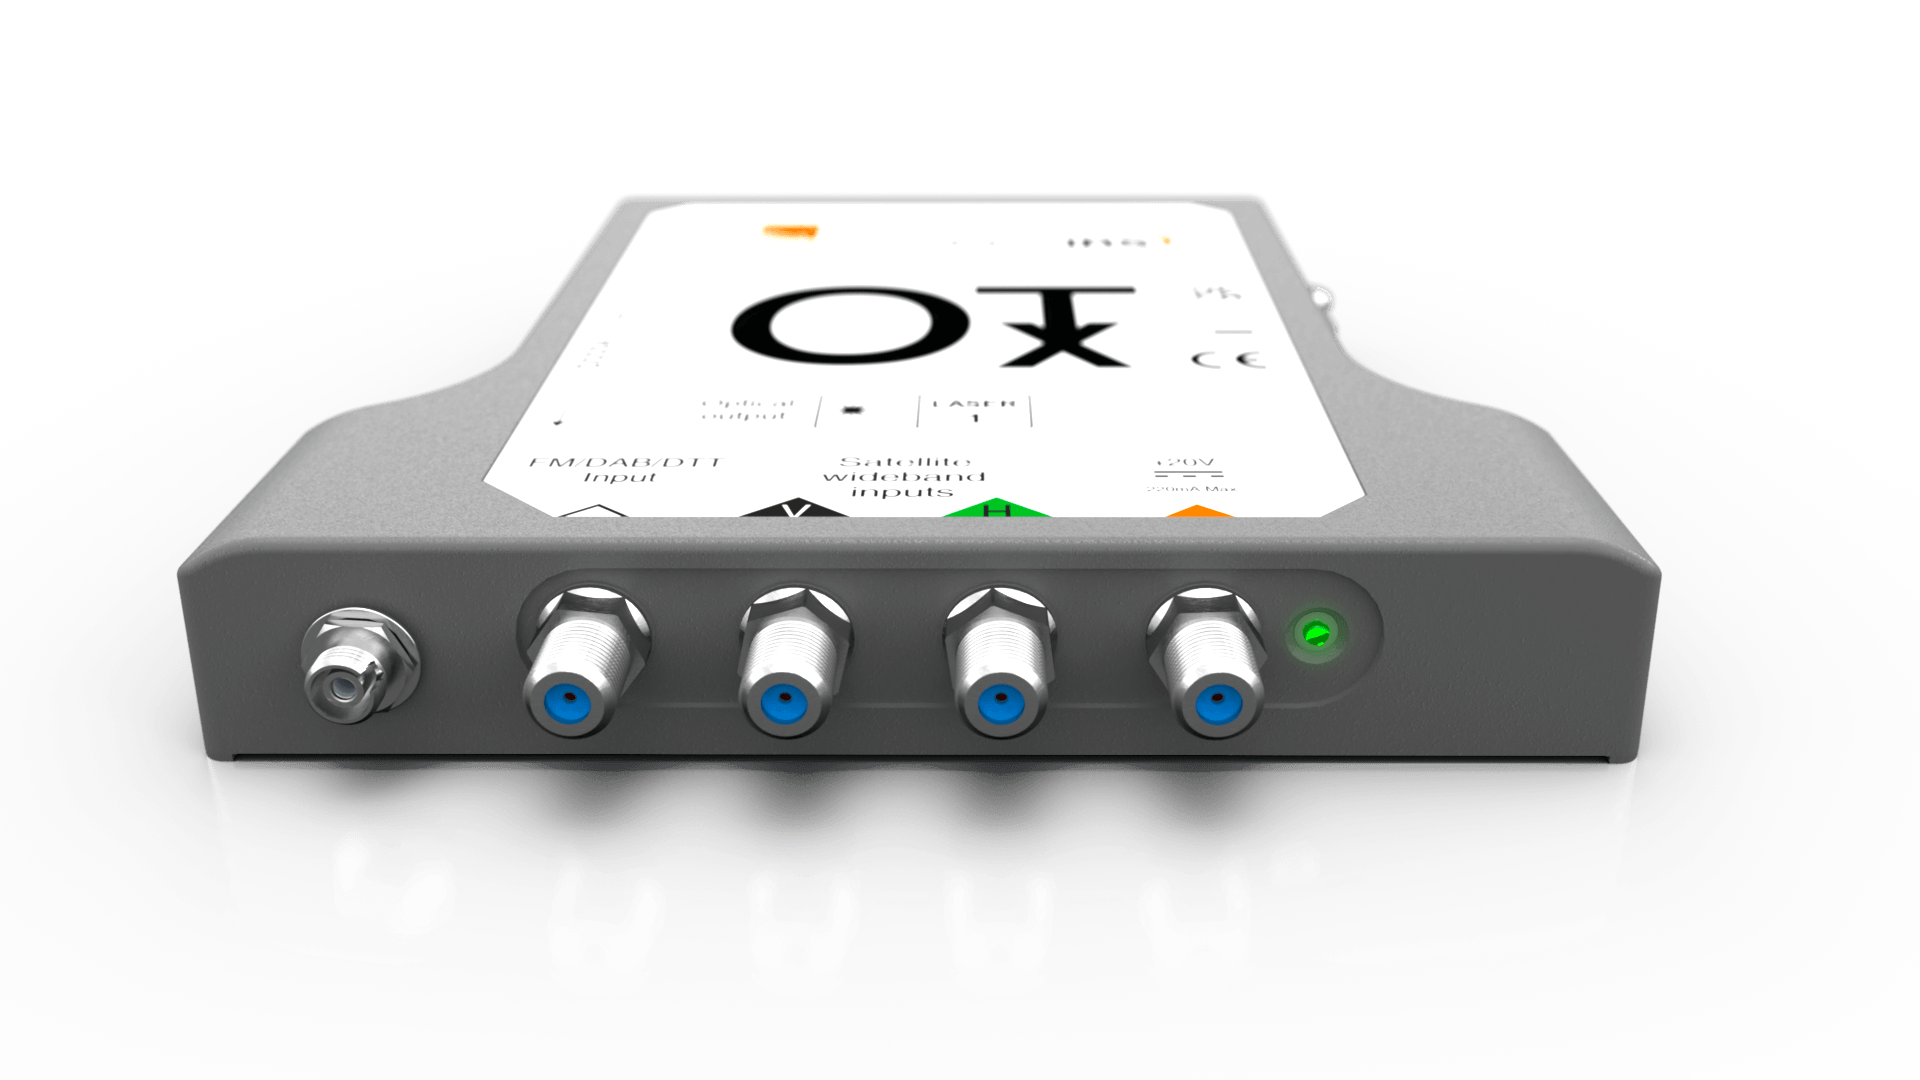 Introducing the NEW OTx and the O2O